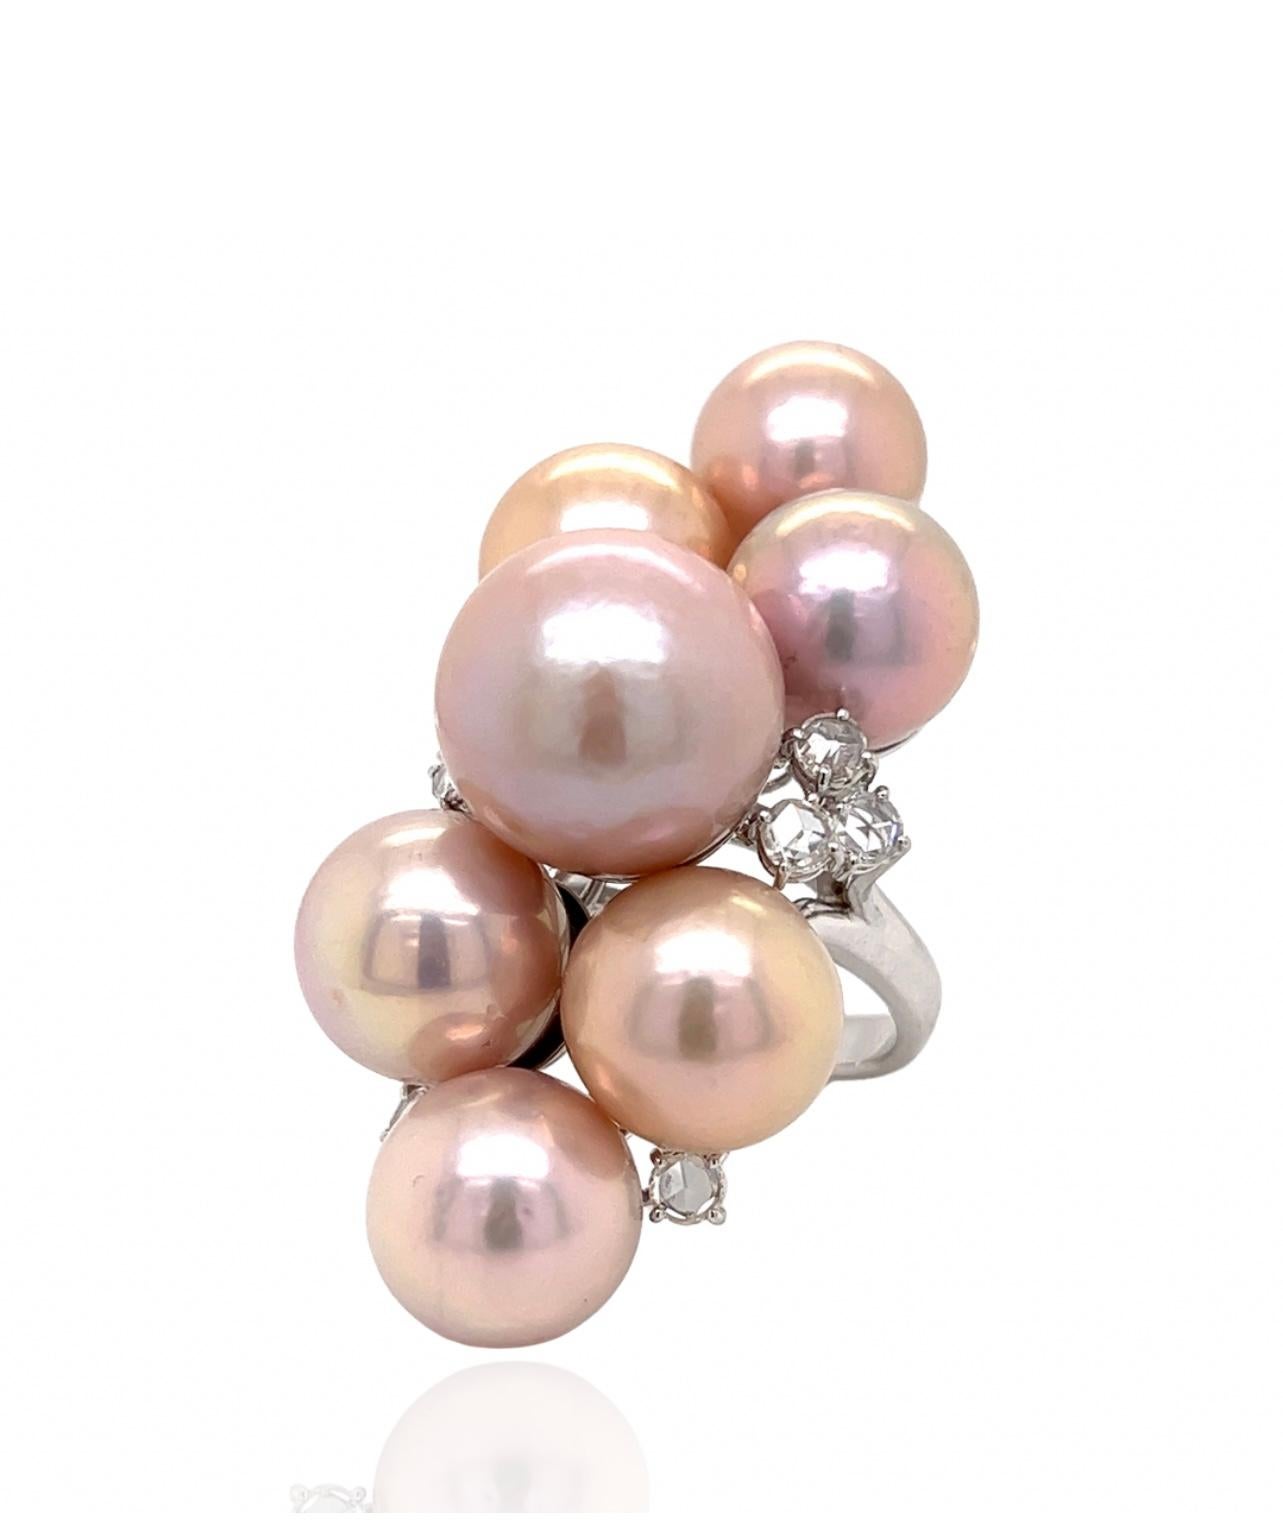 This extraordinary south sea pearl ring features seven luminous rose to light rose pearls.  The pearls are 12-15.5 mm in size.  There is 1.20 ctw in rose cut diamonds.  They are G-H-I in color, VS1-SI1 in clarity.  Set in 30 grams of 18Kt white